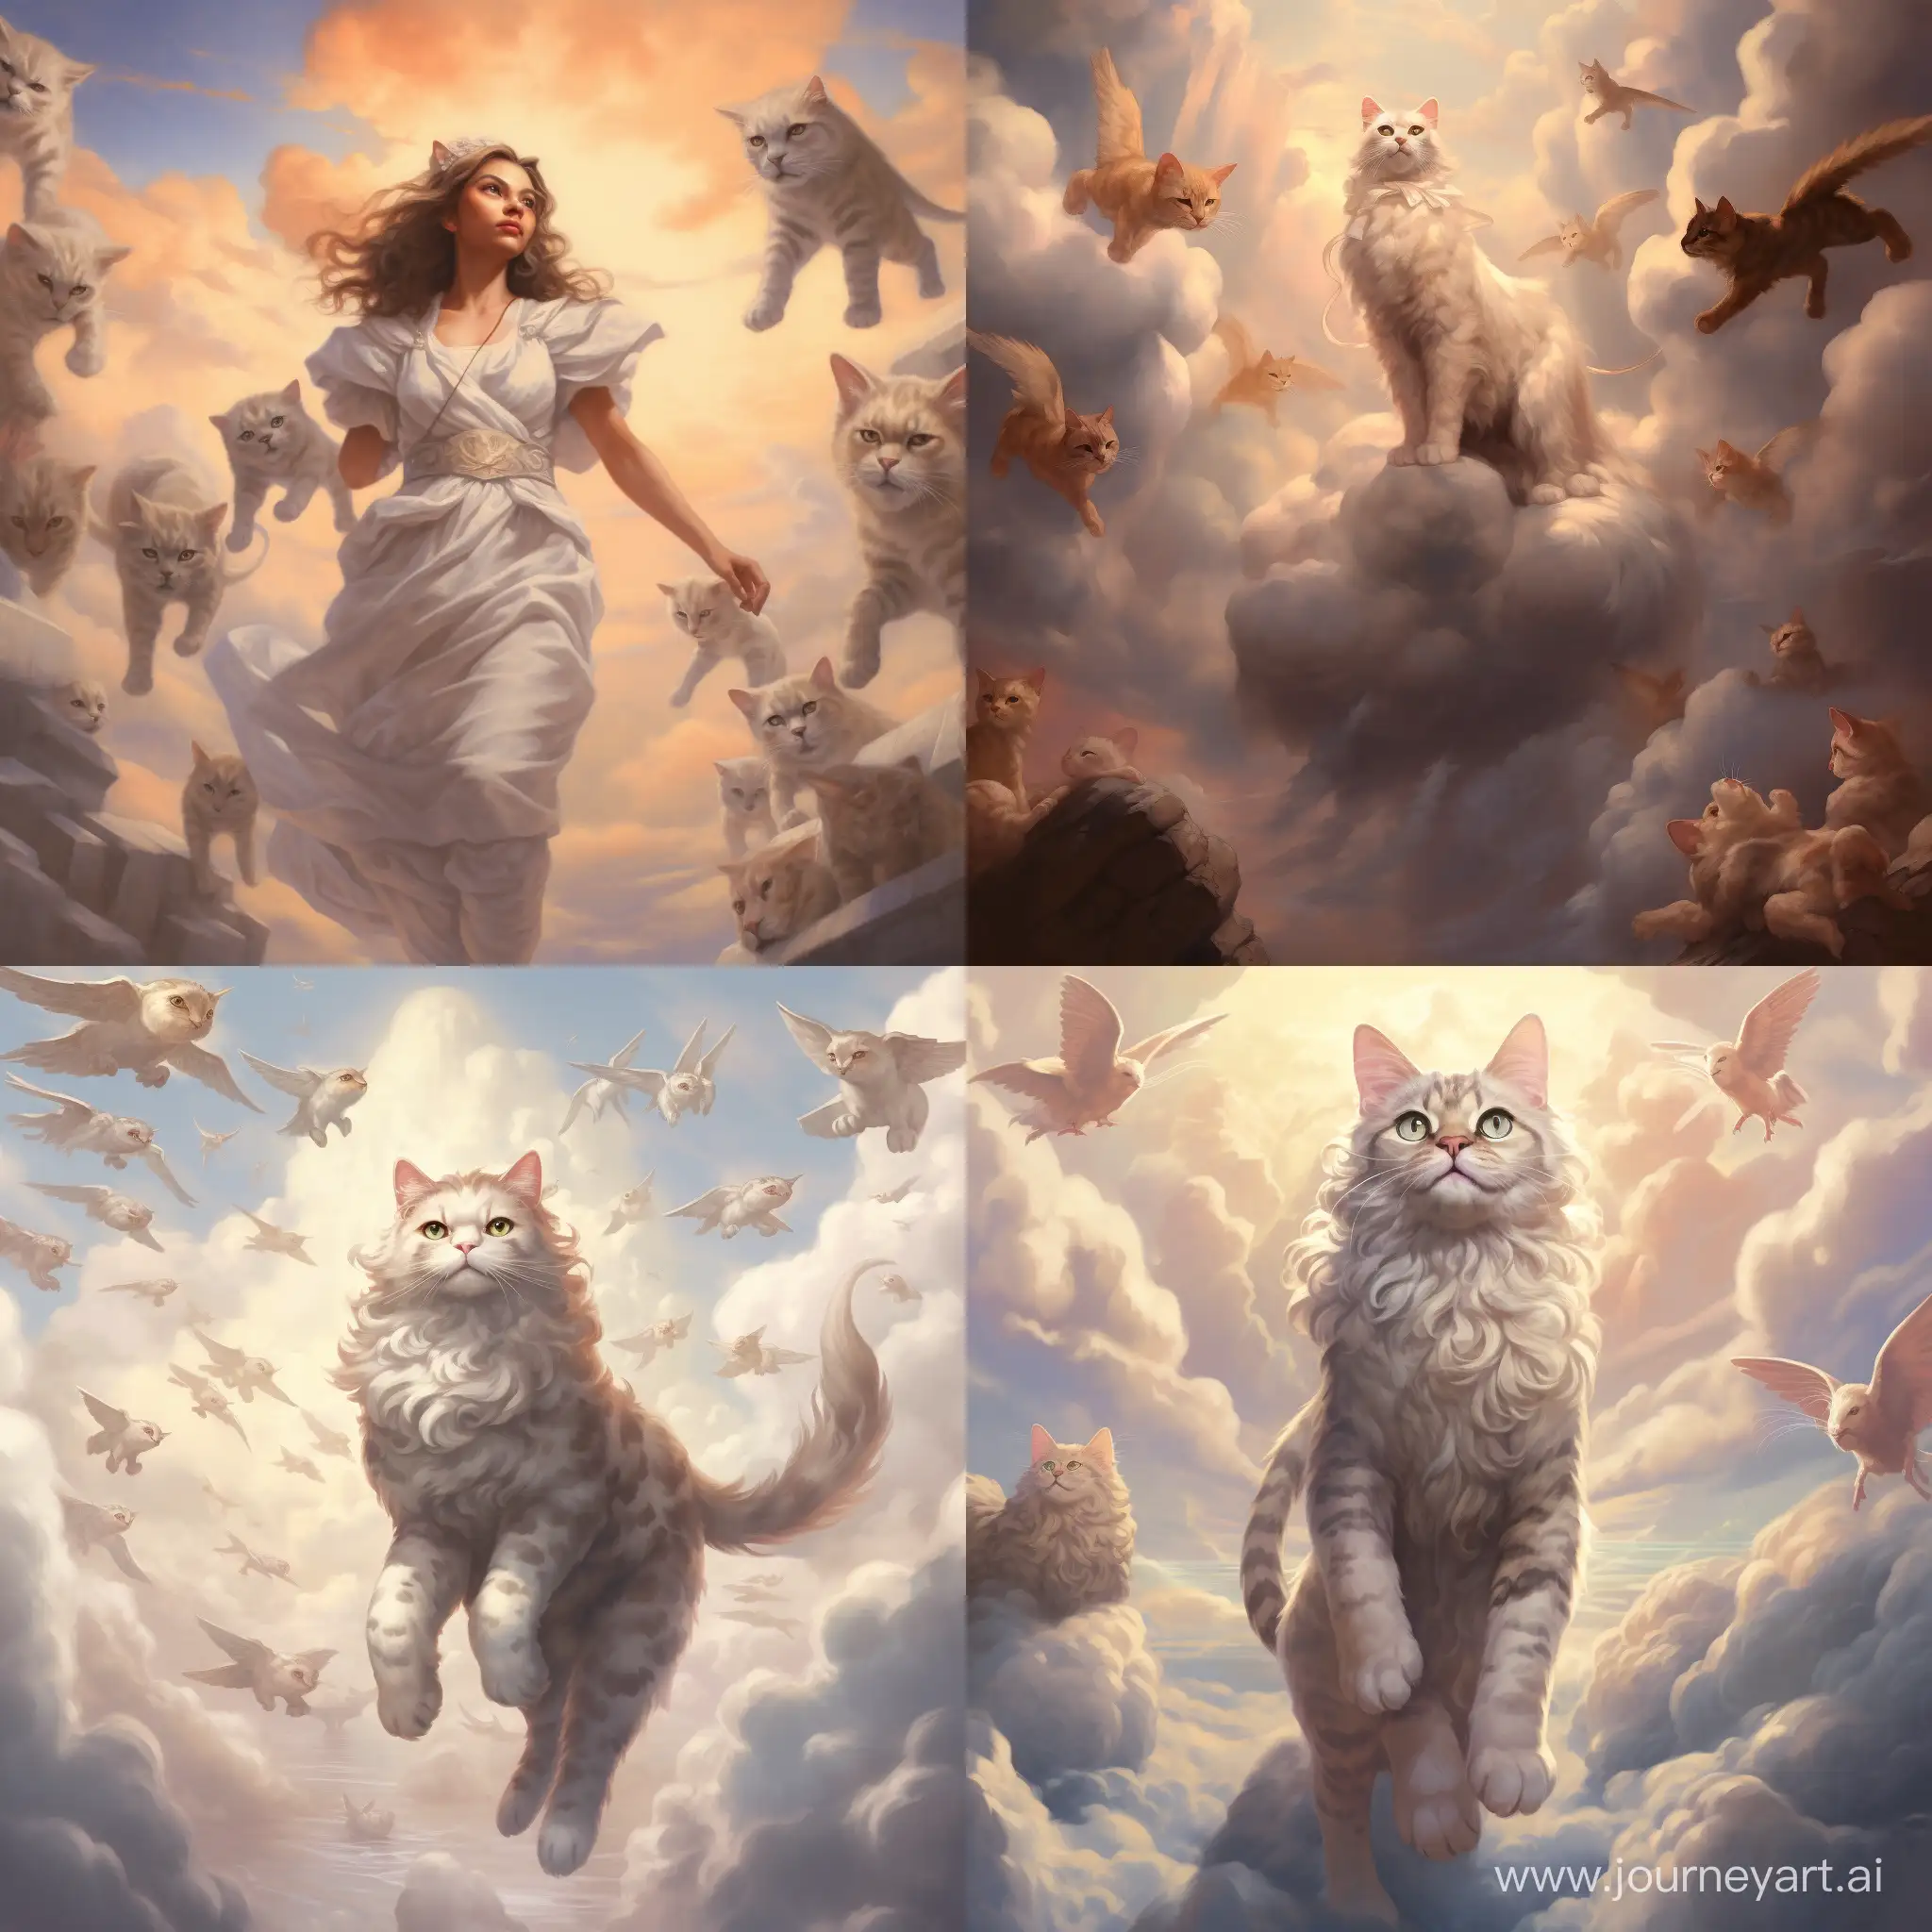 Walking-on-Clouds-with-Giant-Angelic-Cats